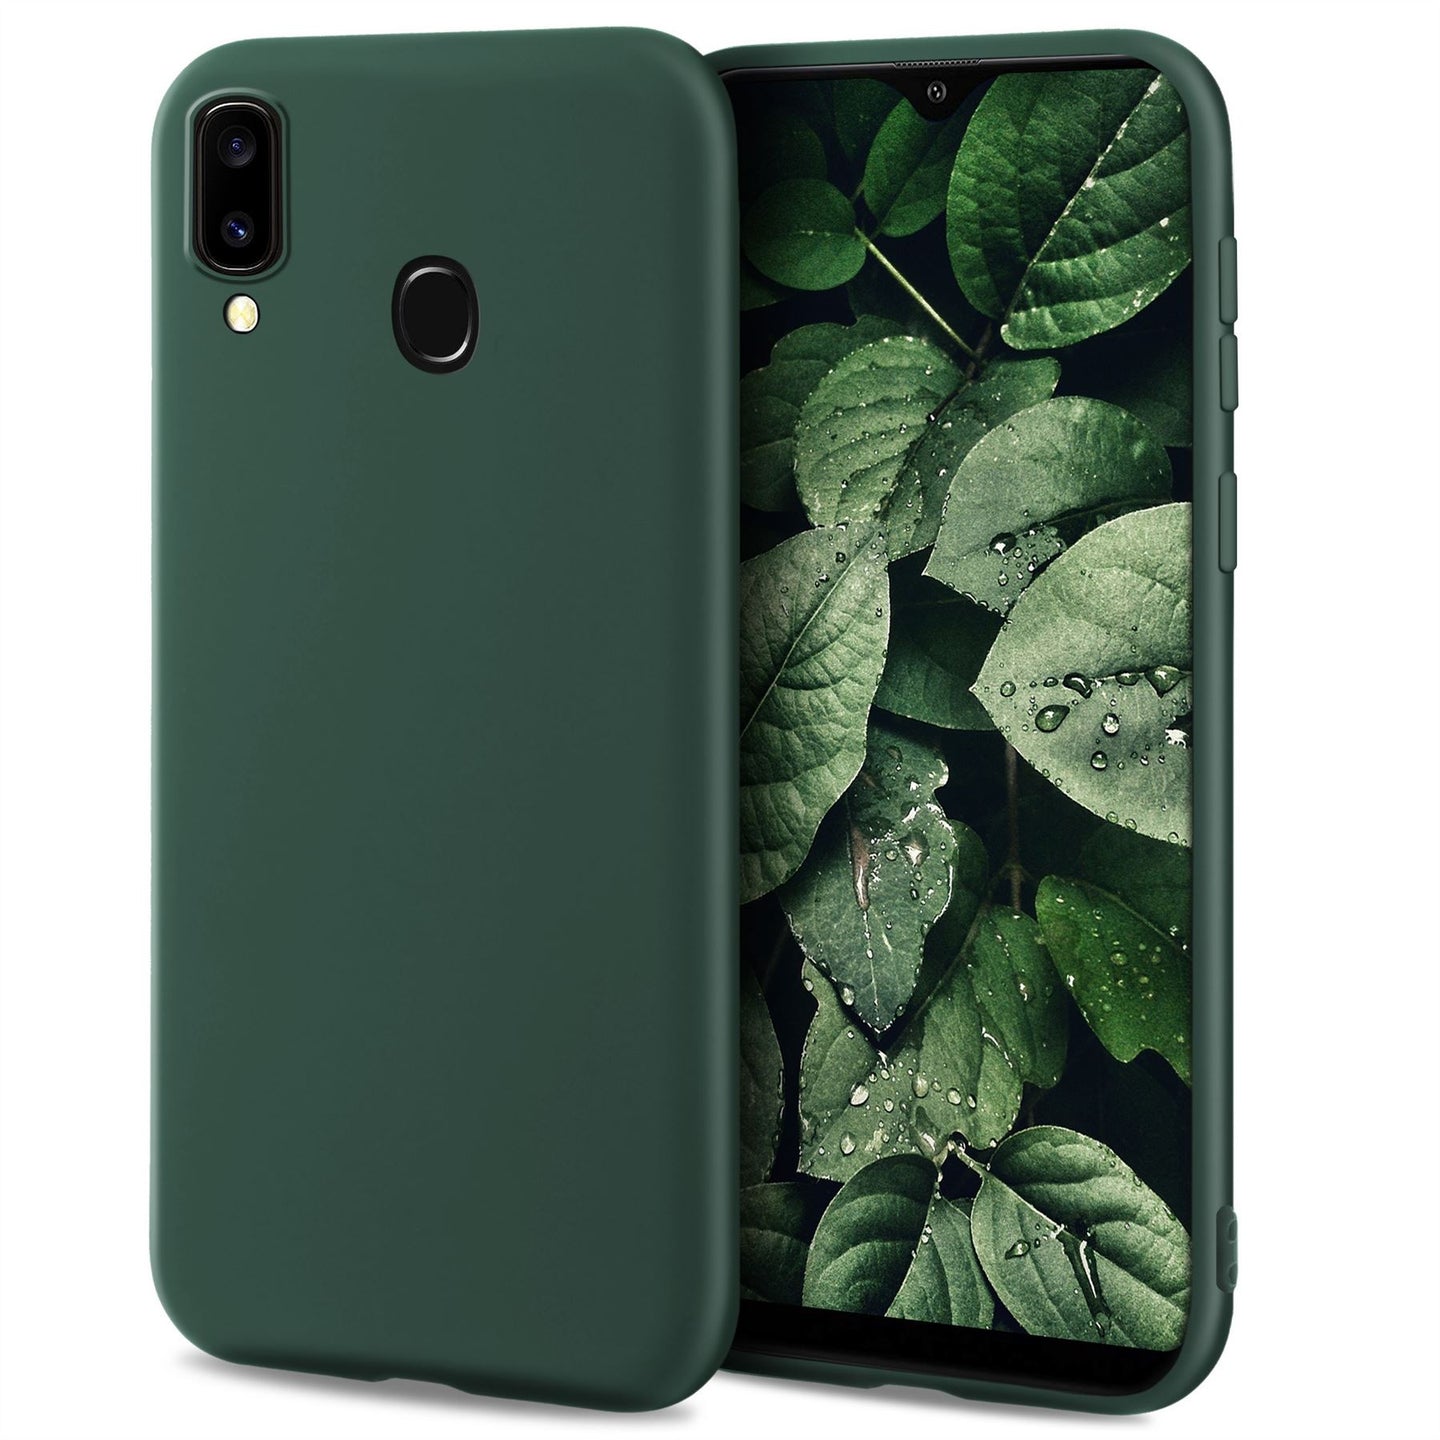 Moozy Minimalist Series Silicone Case for Samsung A40, Midnight Green - Matte Finish Slim Soft TPU Cover